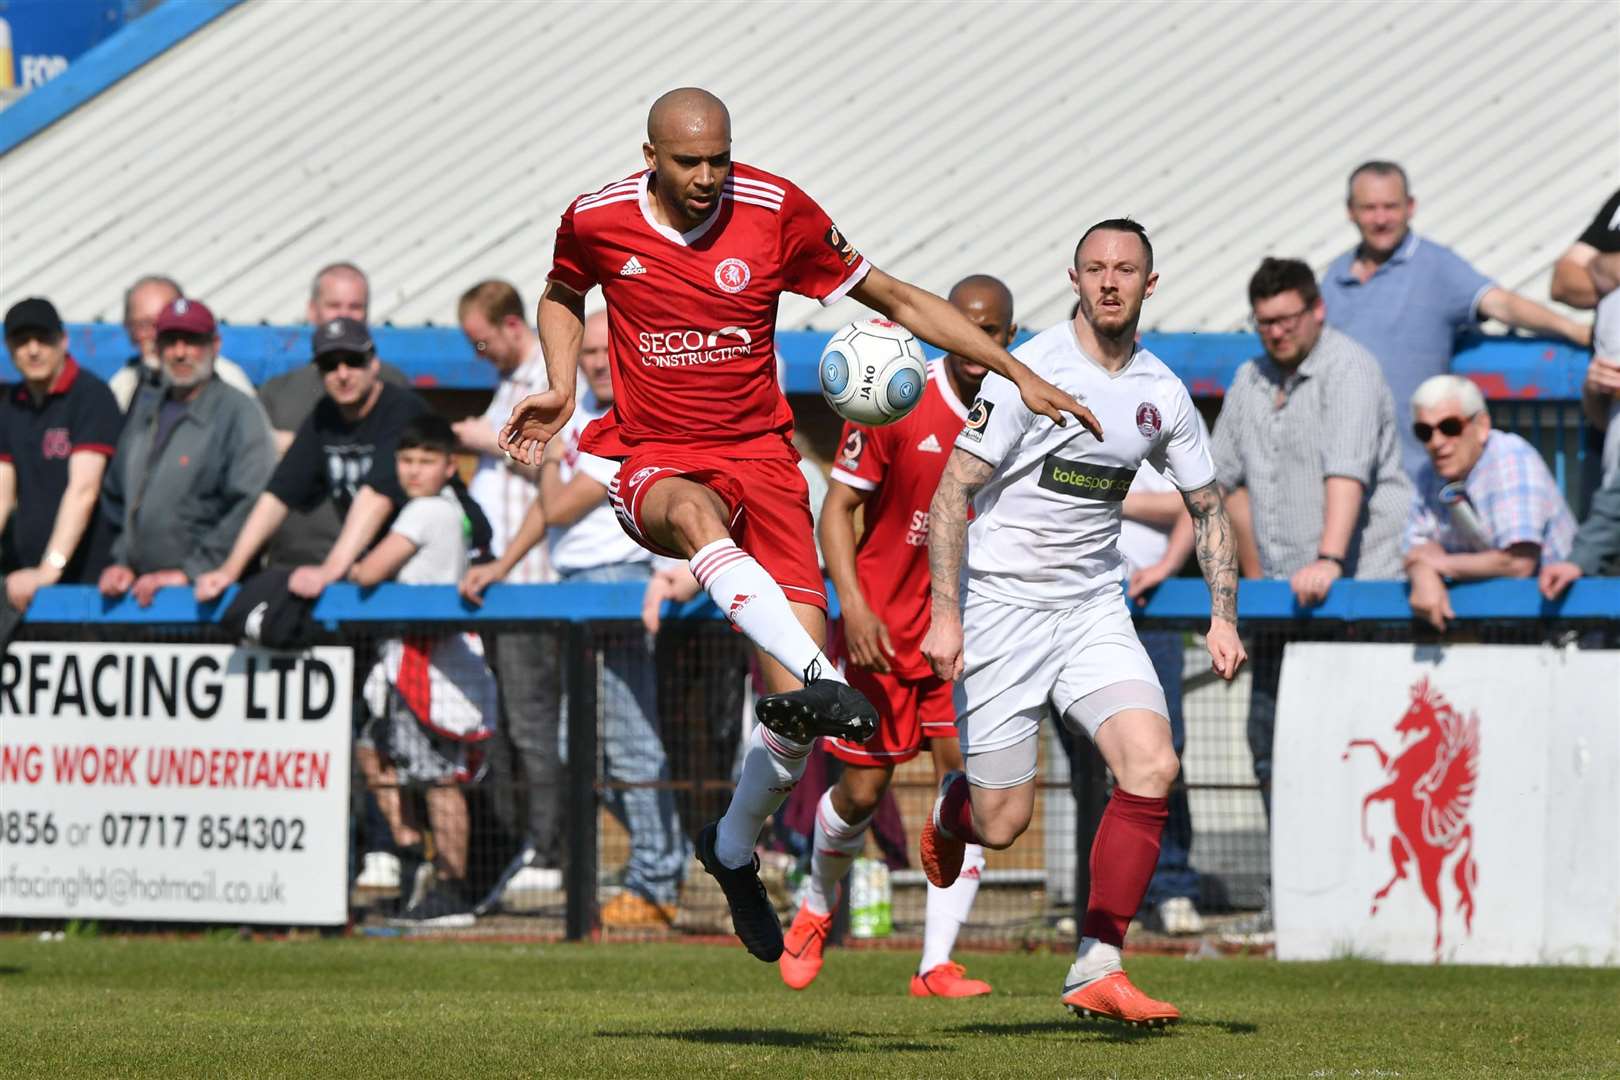 Welling's Richard Orlu gets to the ball first against Chelmsford. Picture: Keith Gillard (8909074)